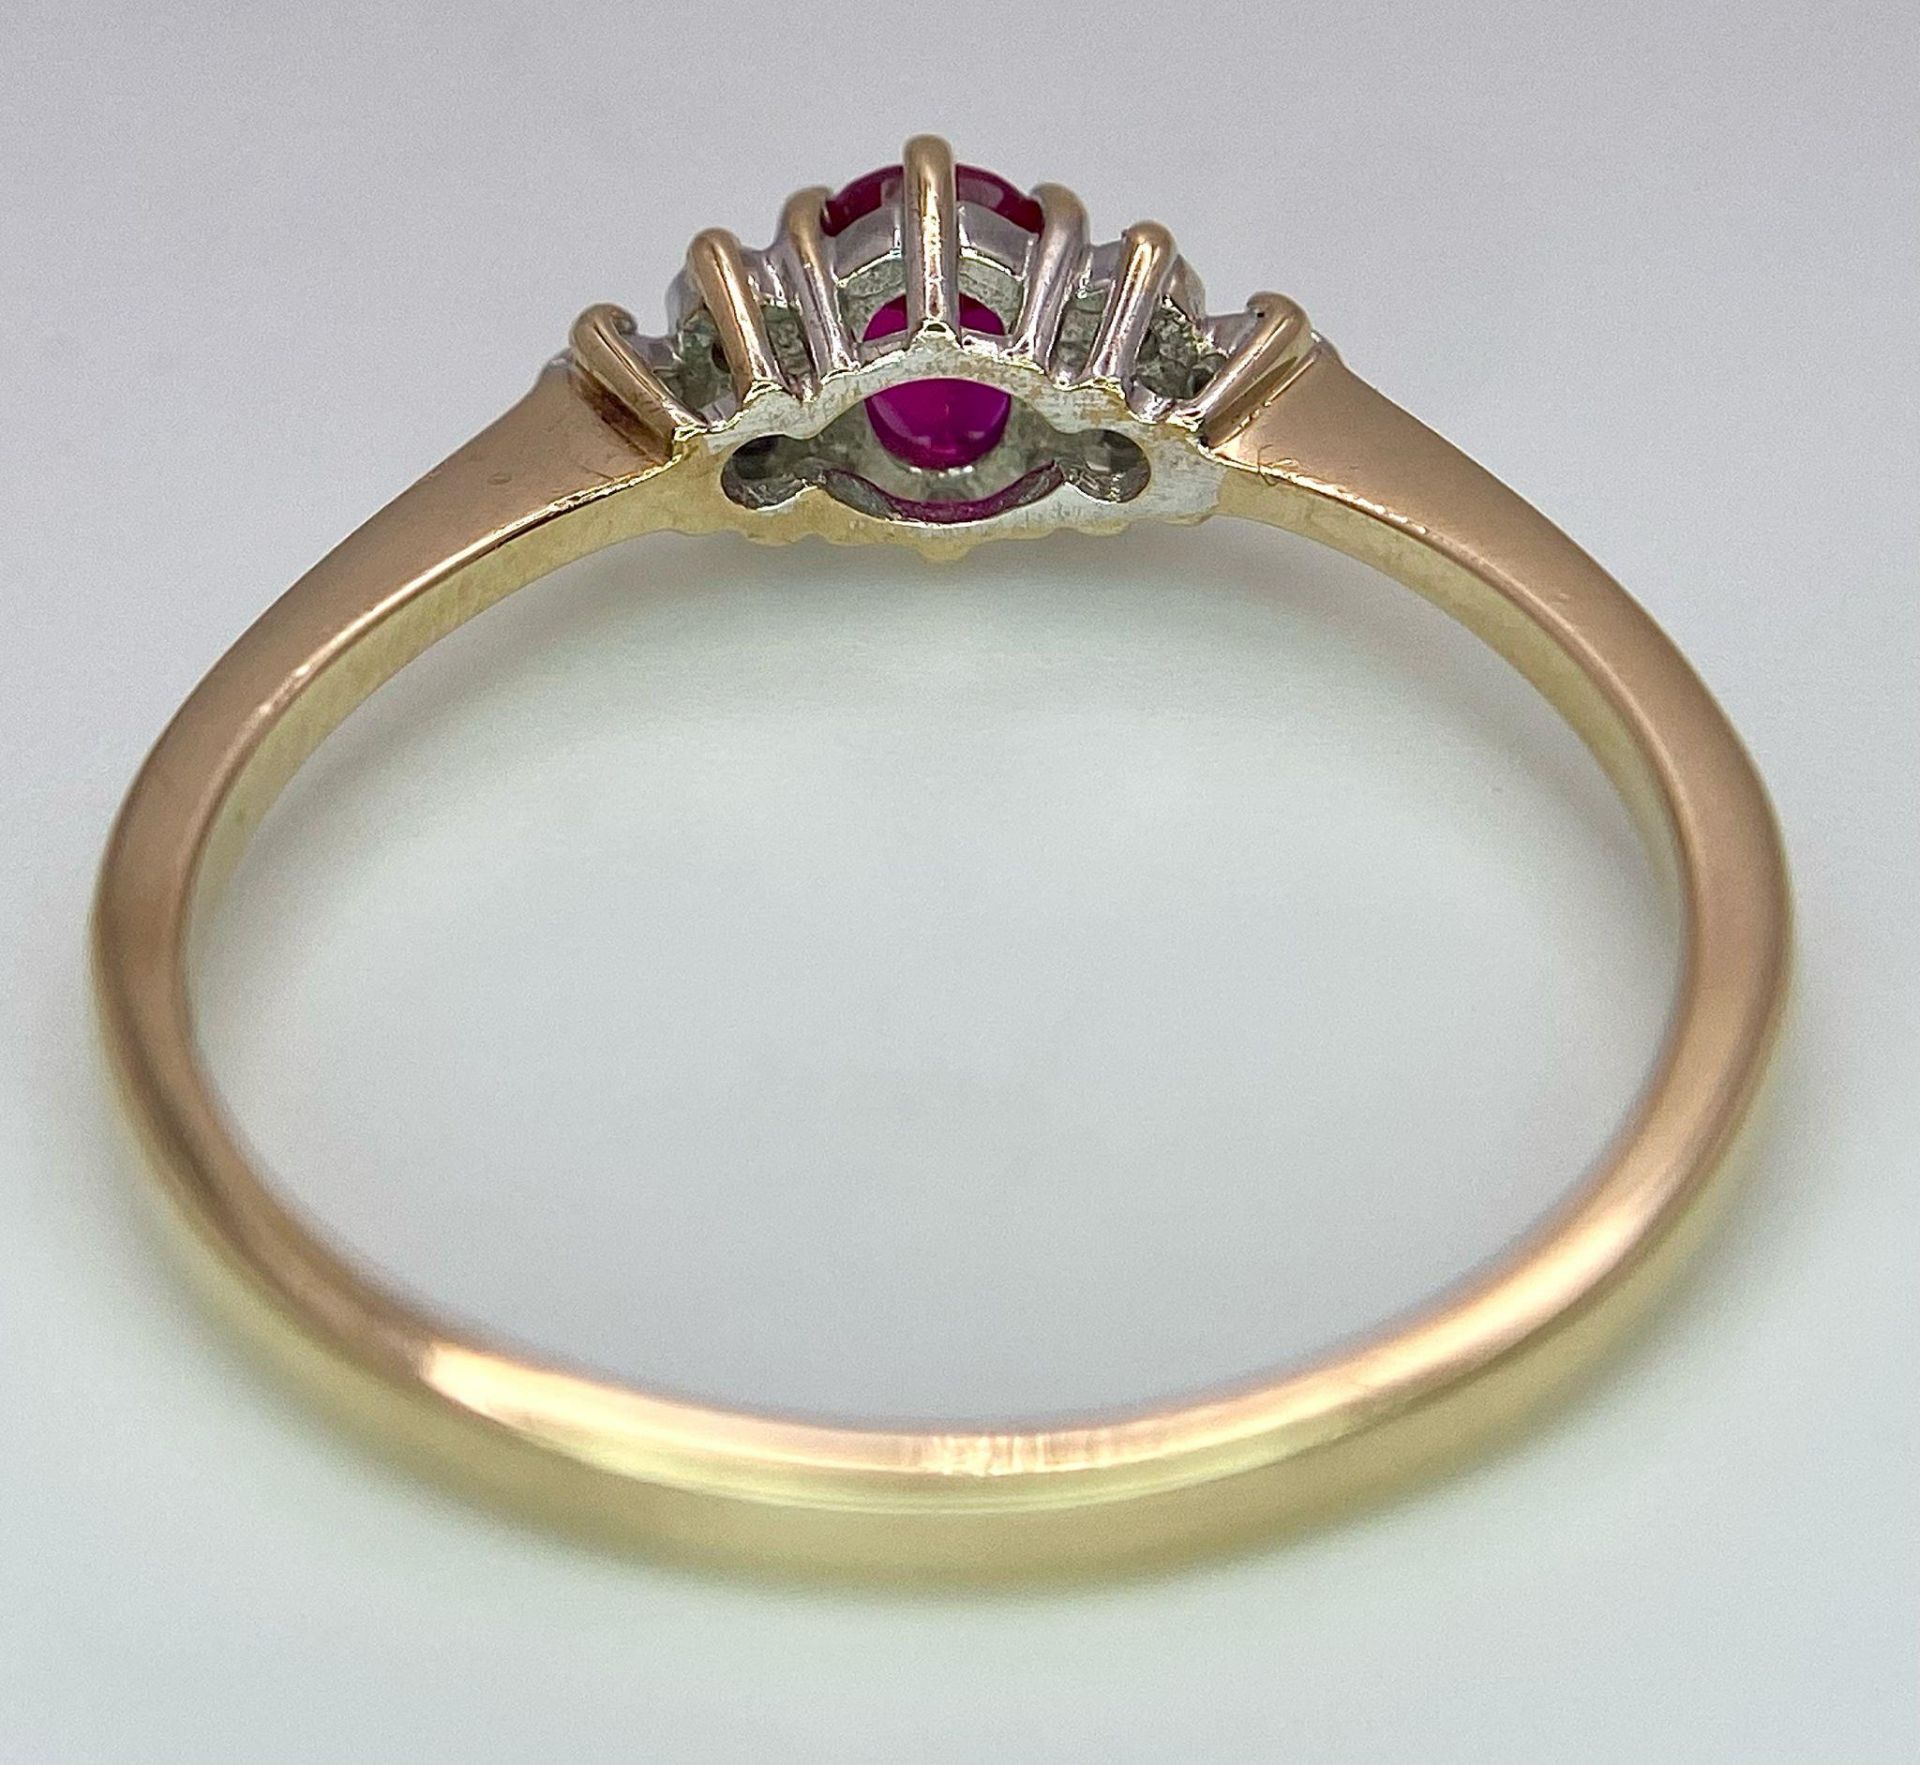 A 9K Yellow Gold Diamond & Red Stone (probably ruby) Ring. Size S, 2g total weight. Ref: 8418 - Image 5 of 7